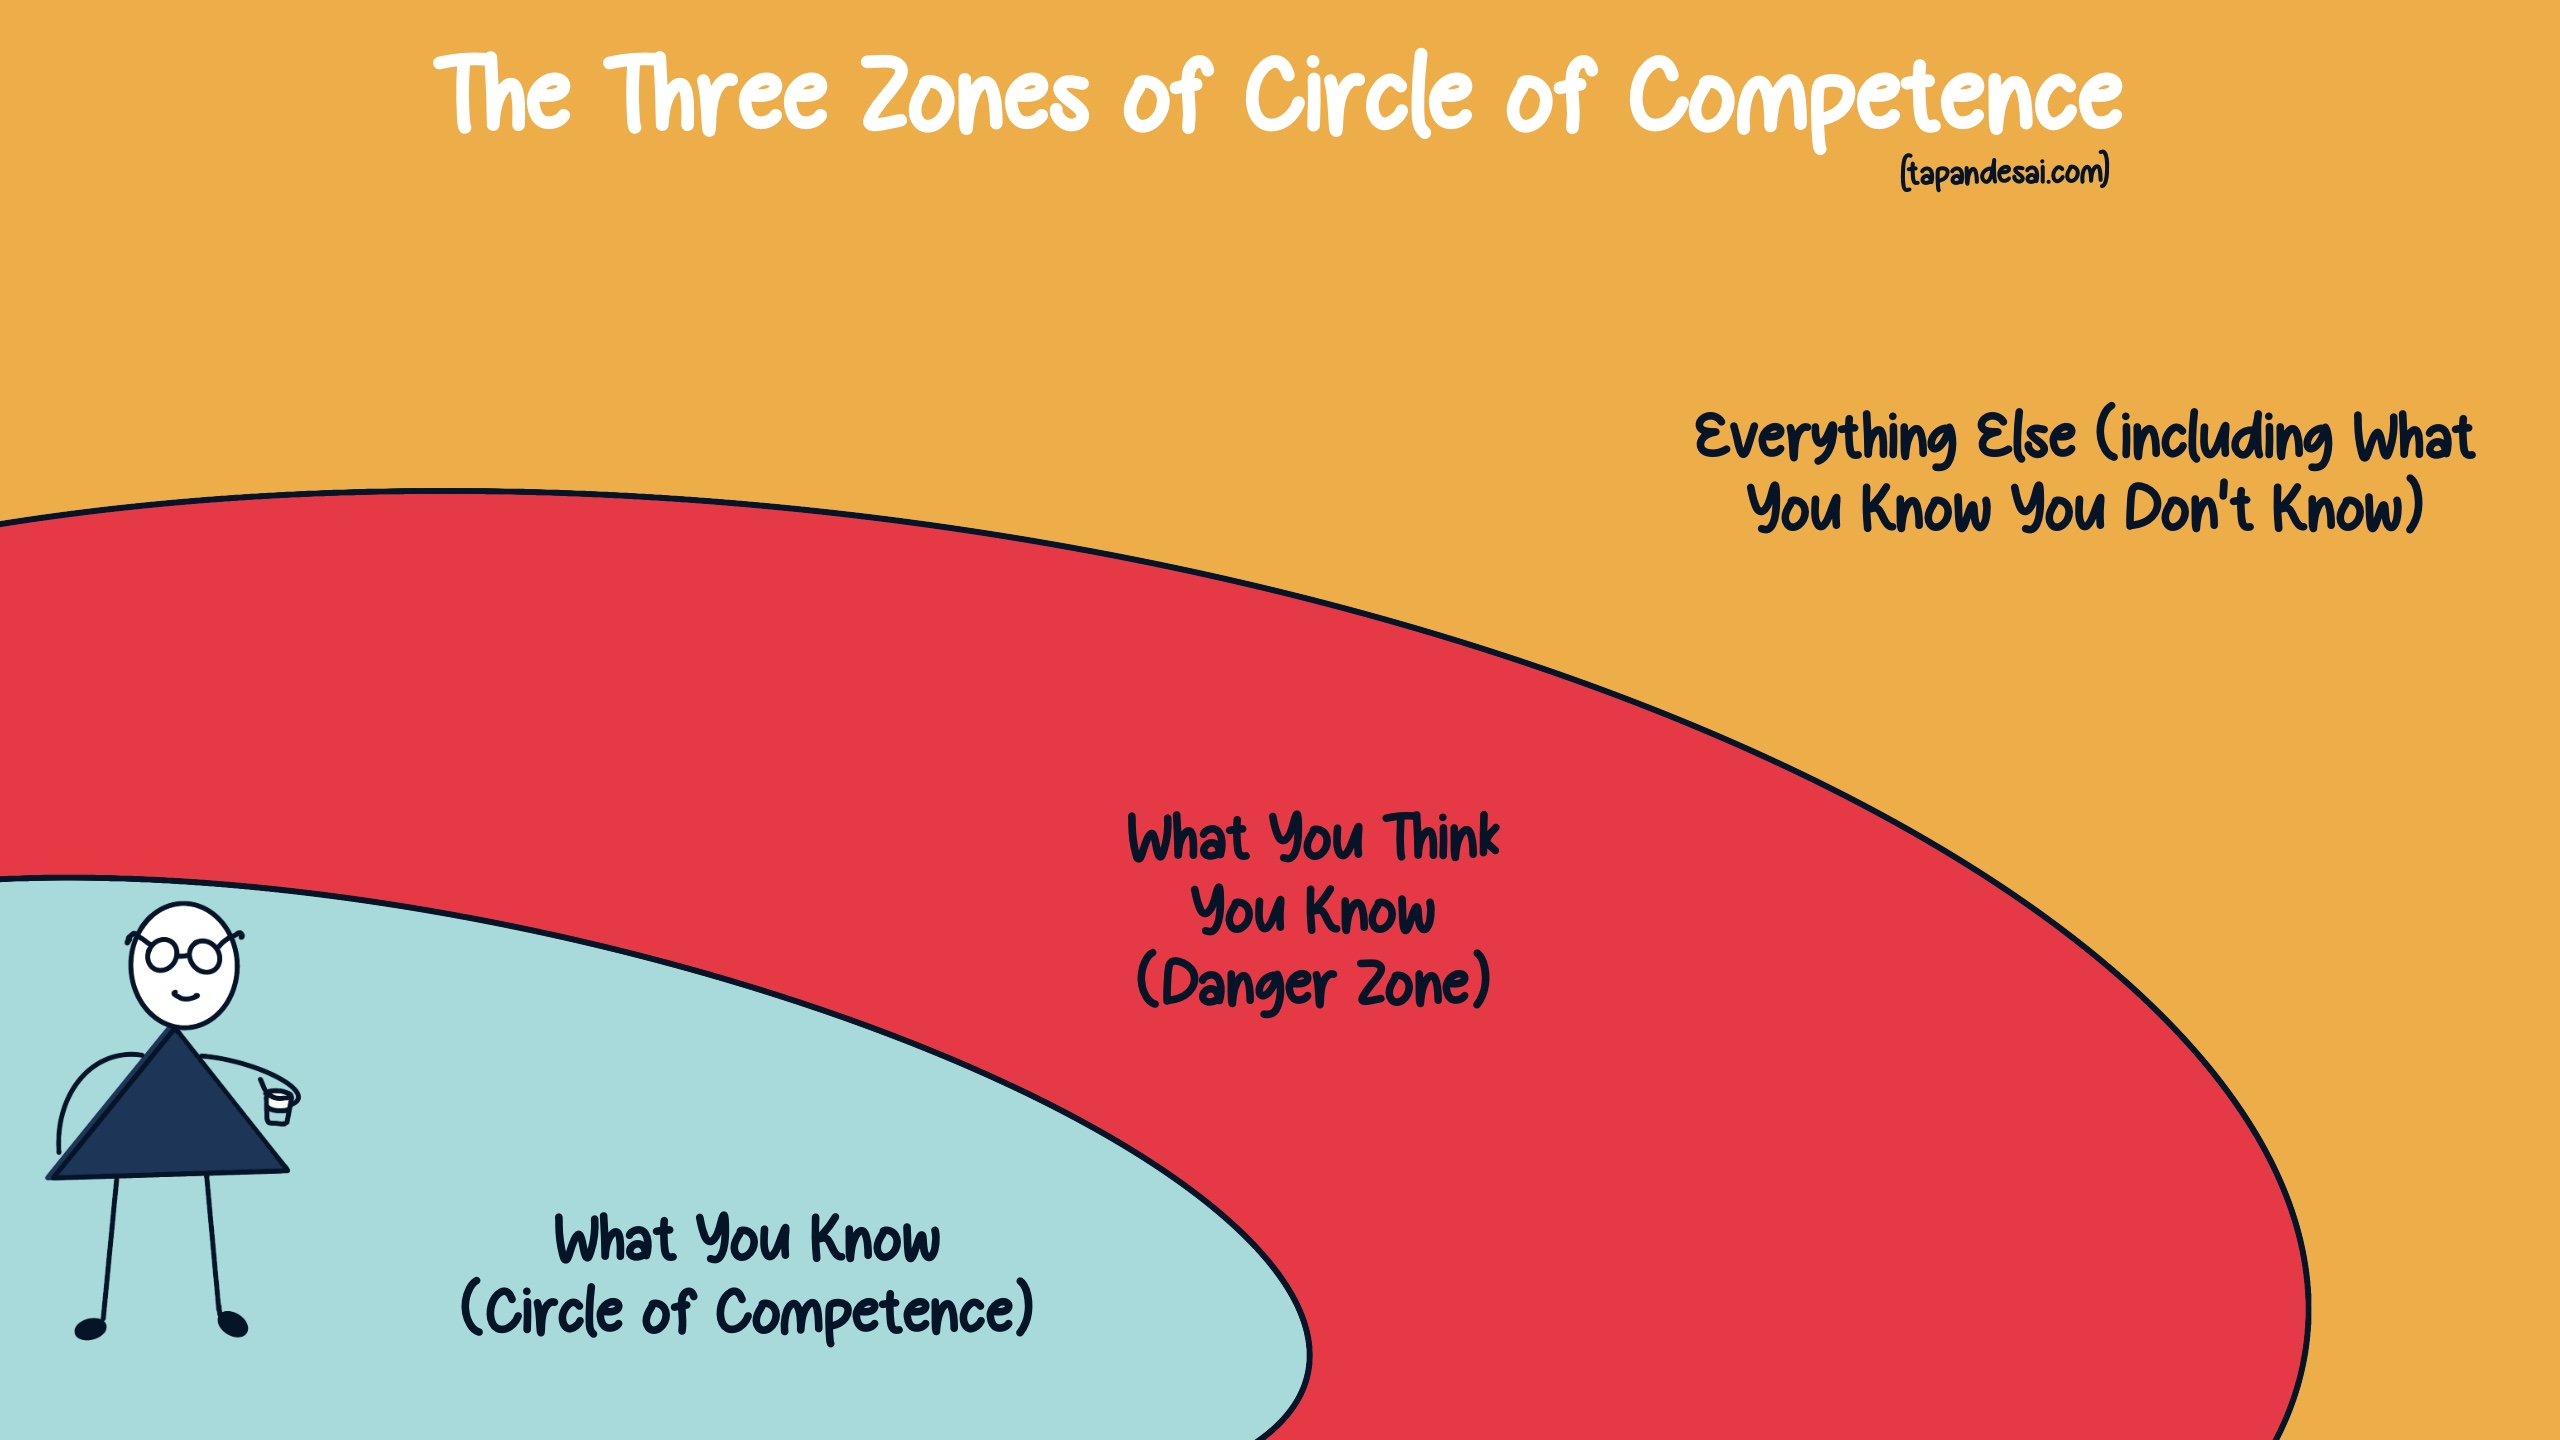 An image explaining what is circle of competence using three zones and it's boundaries